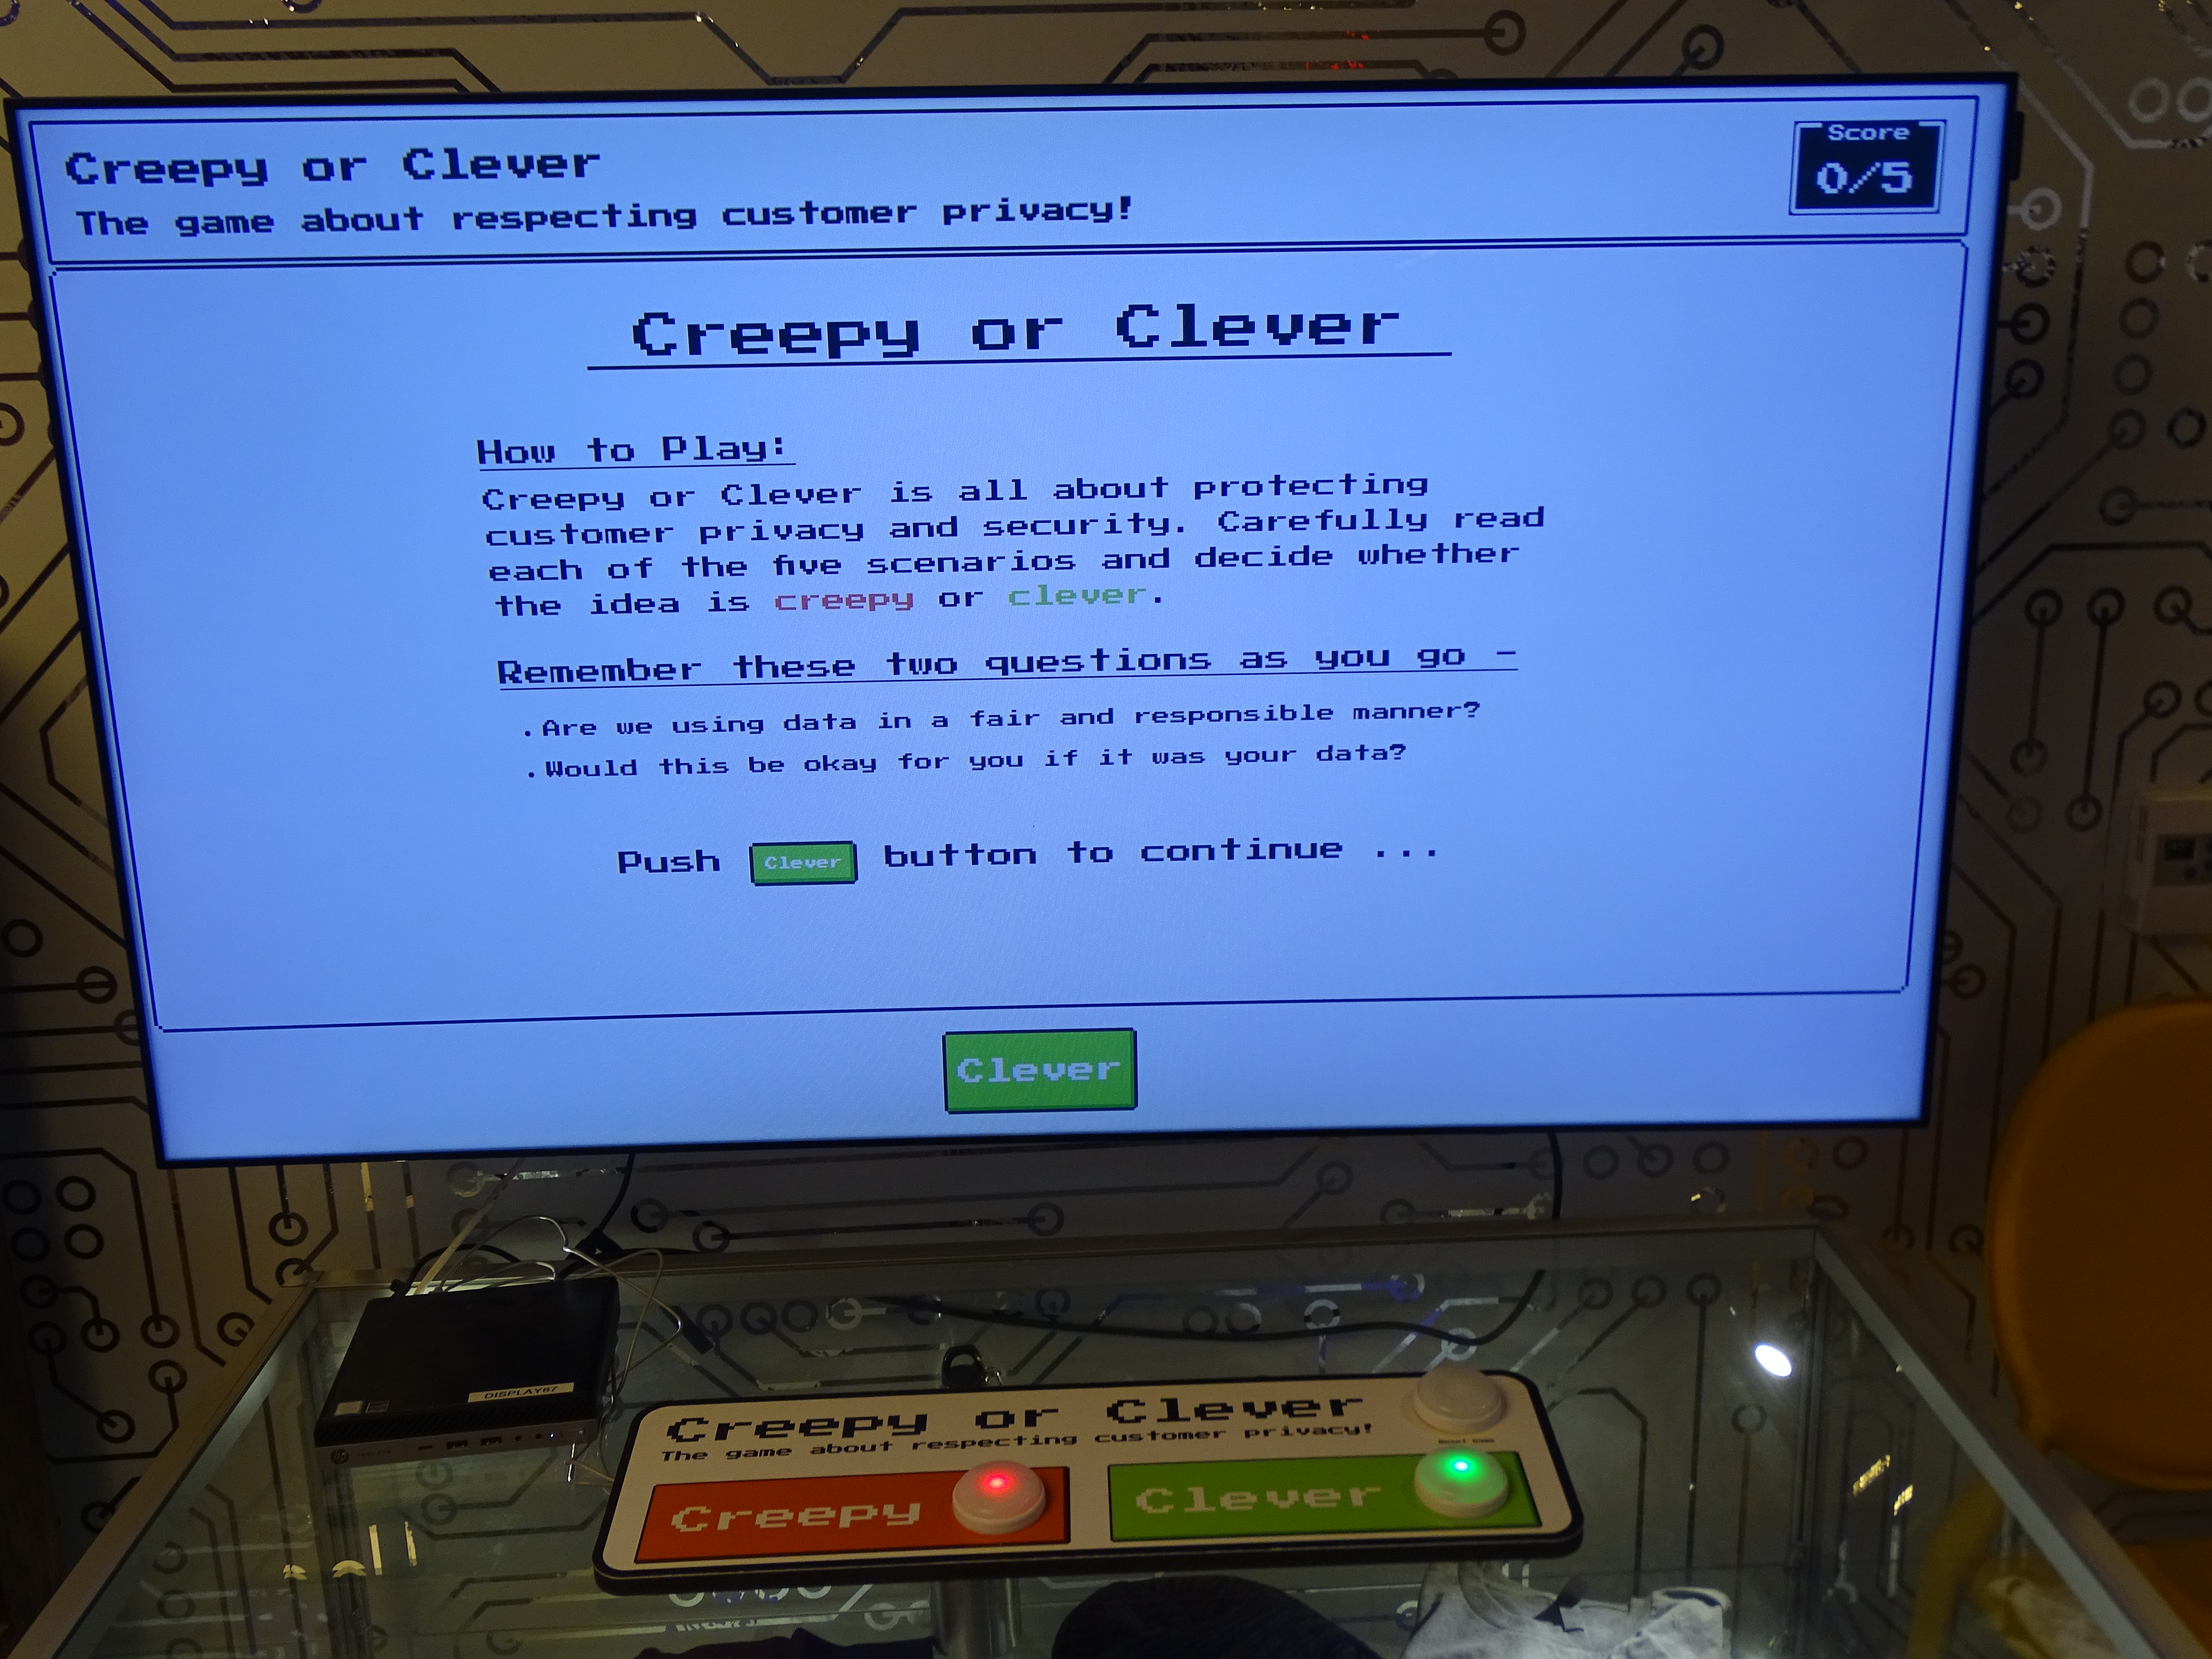 Creepy or clever game